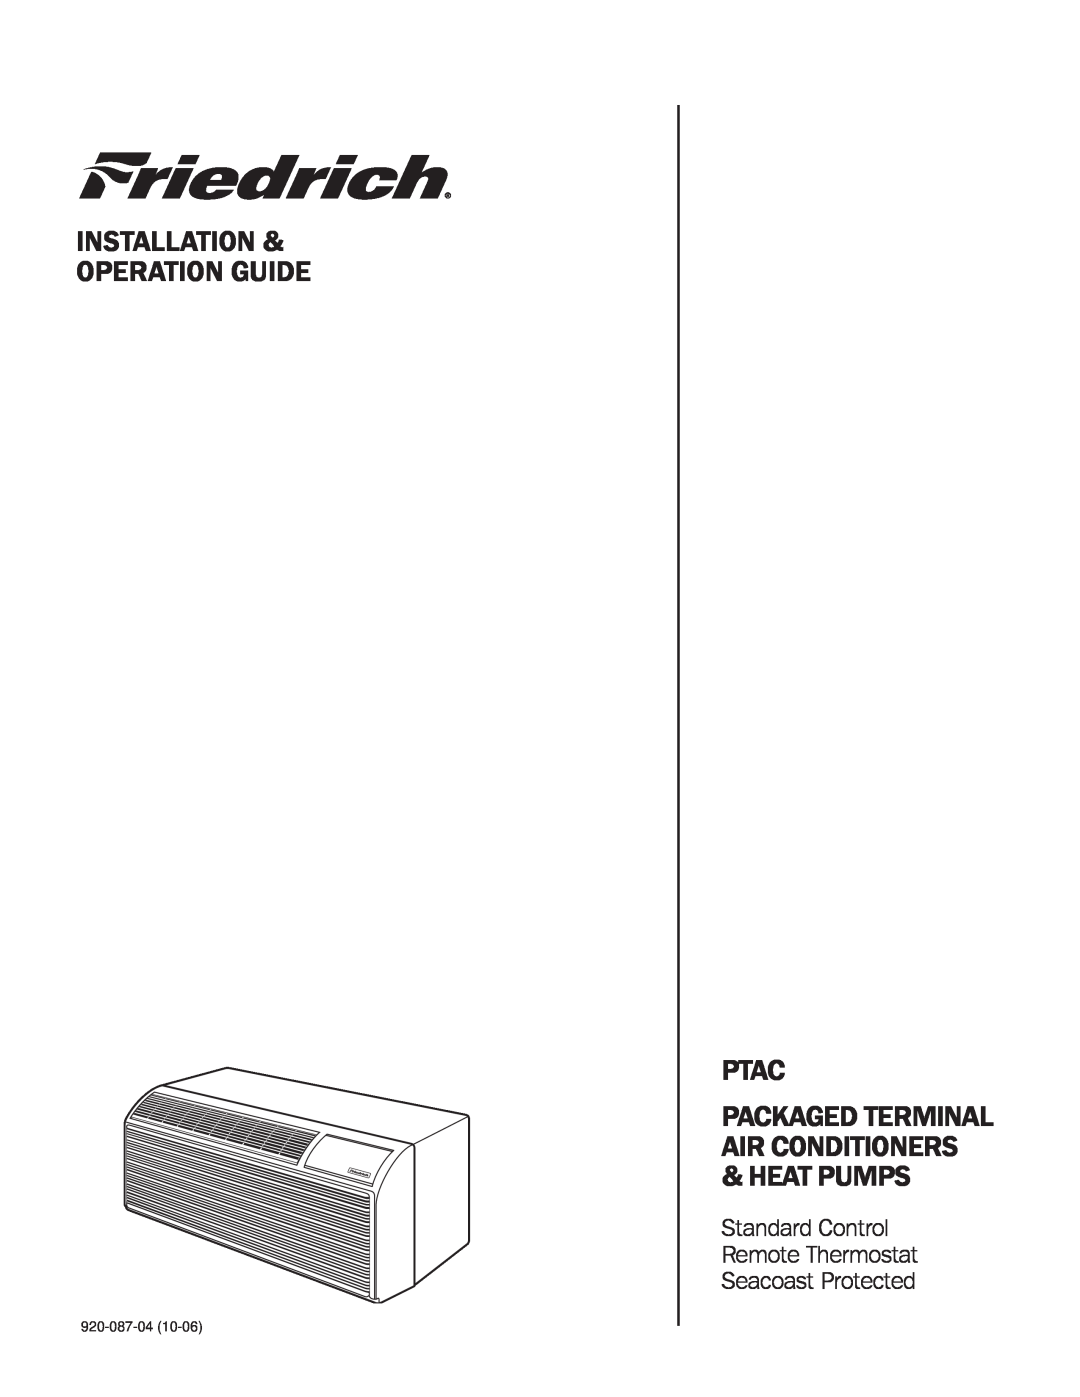 Friedrich HEAT PUMPS manual Ptac, Standard Control Remote Thermostat, Seacoast Protected, Installation & Operation Guide 